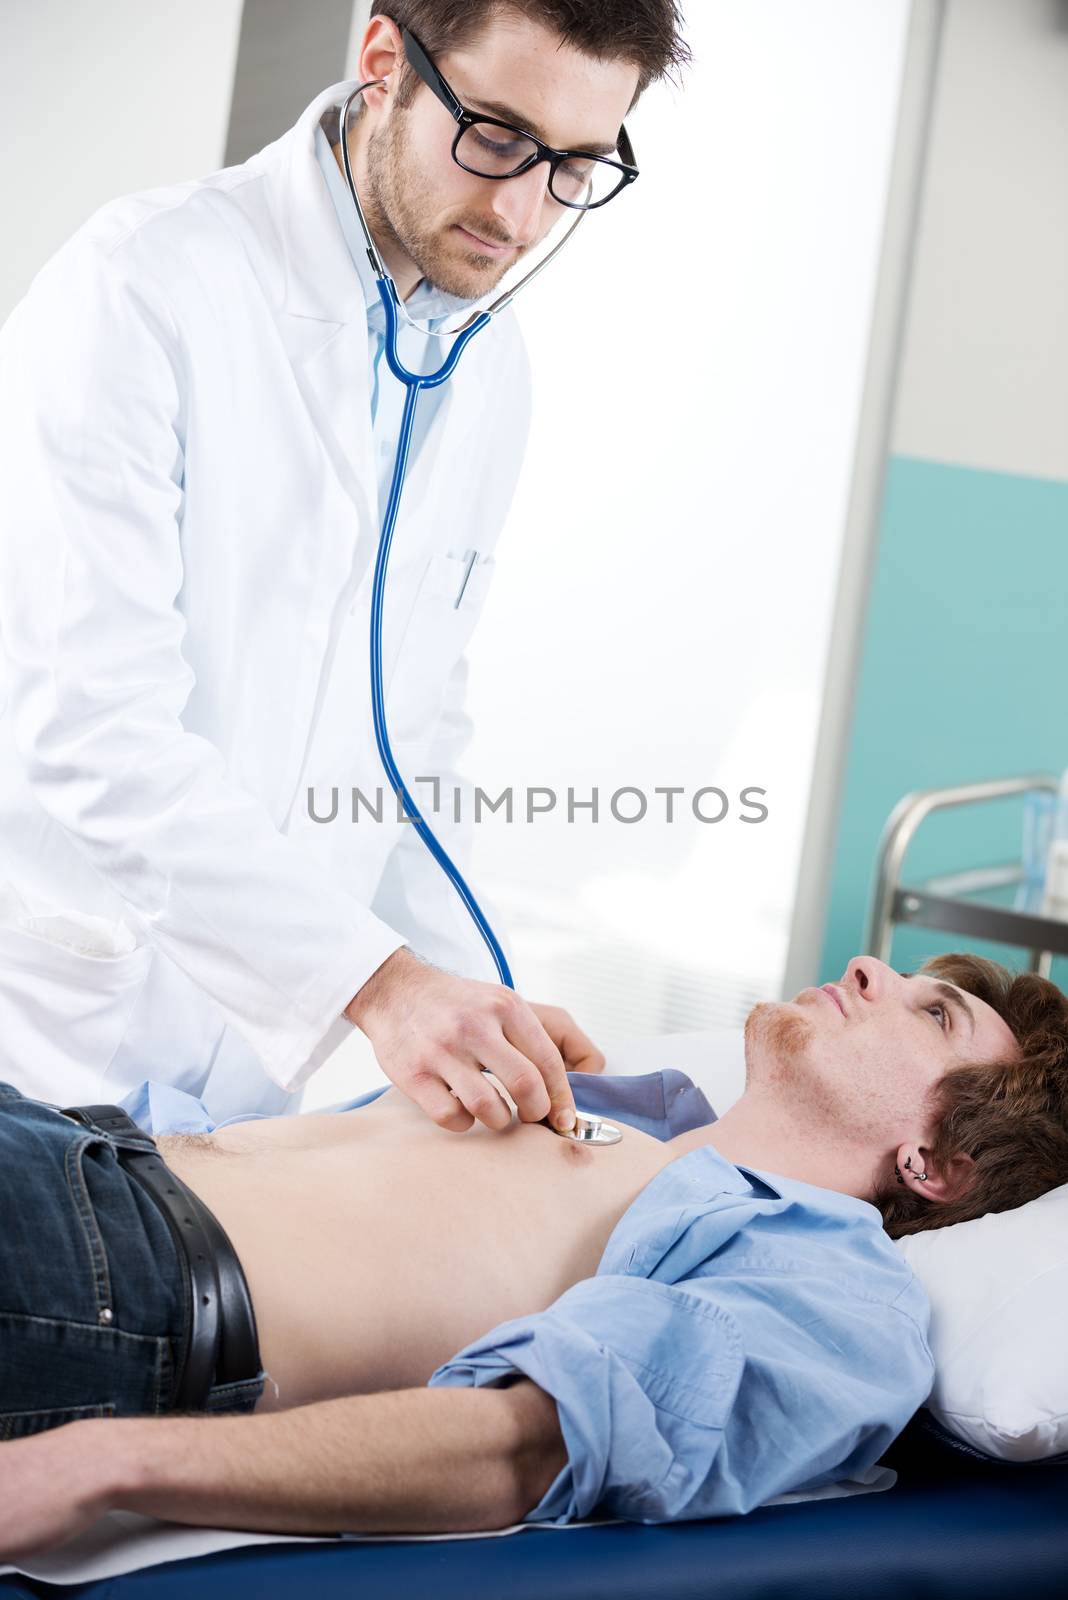 Doctor vising carefully a patient with a stethoscope on a medical examination table.